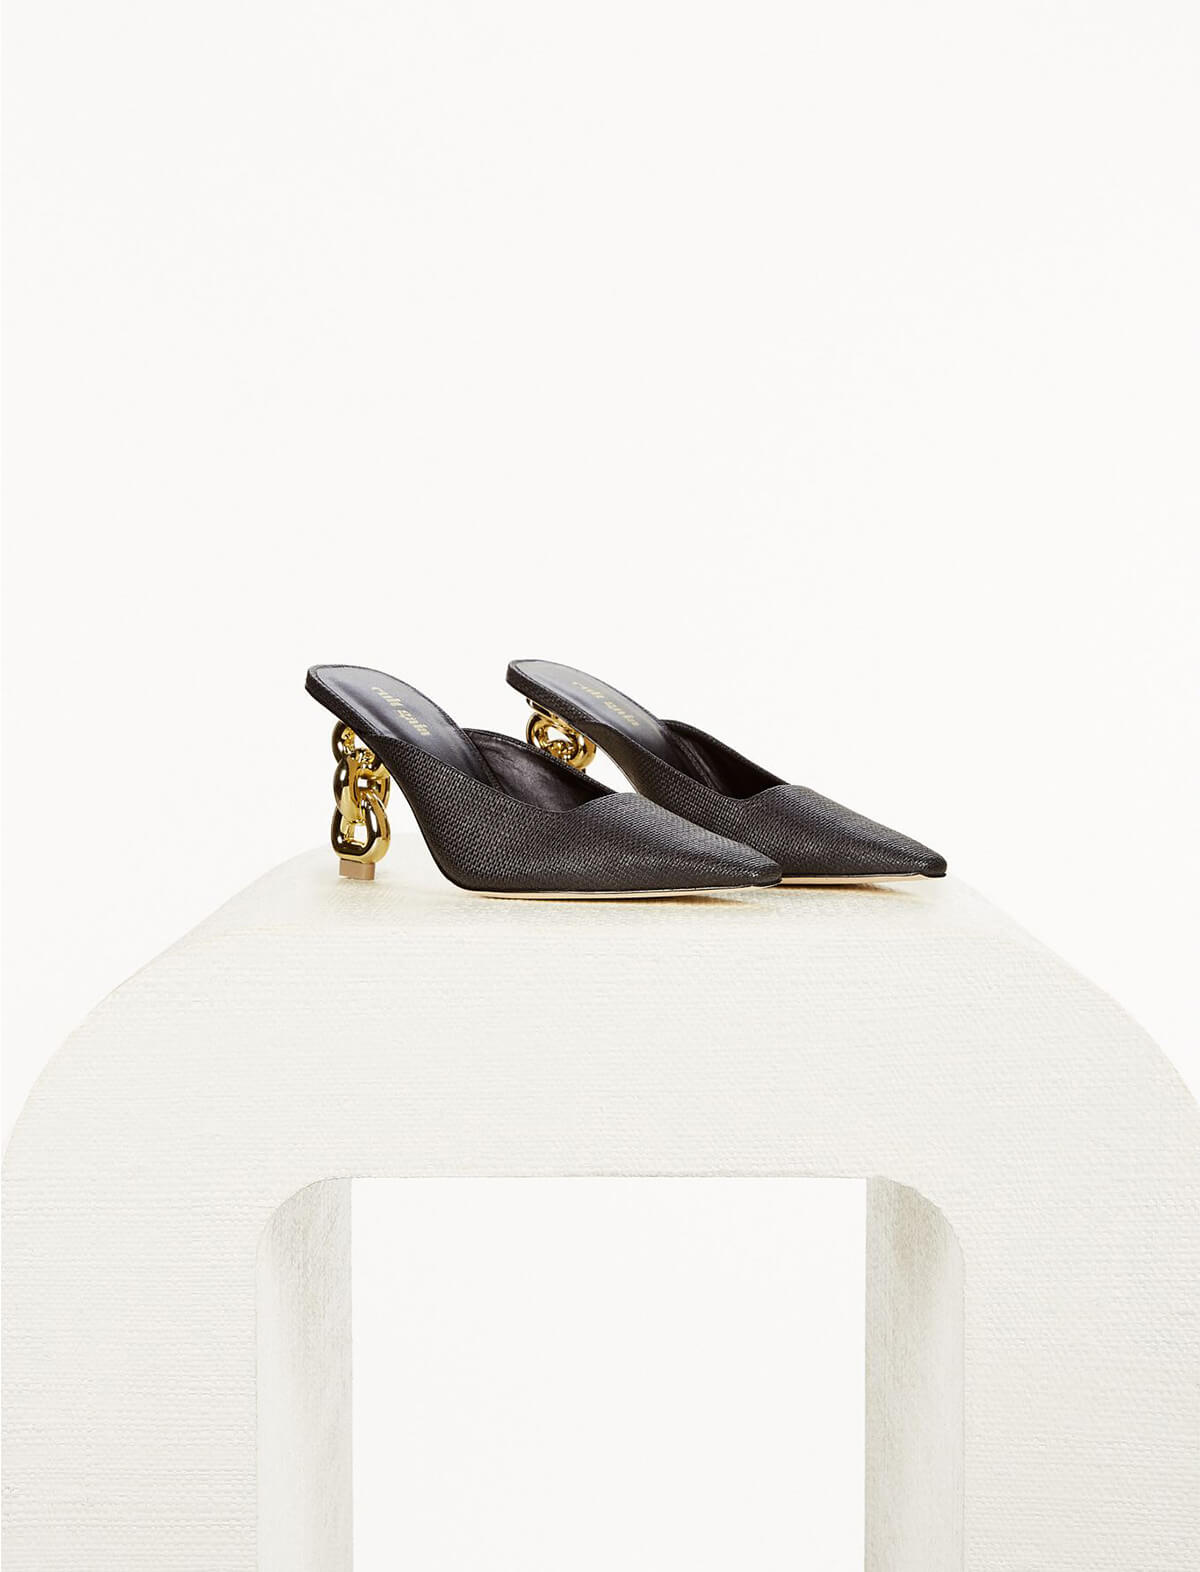 CULT GAIA Harlow Mules in Black and Gold